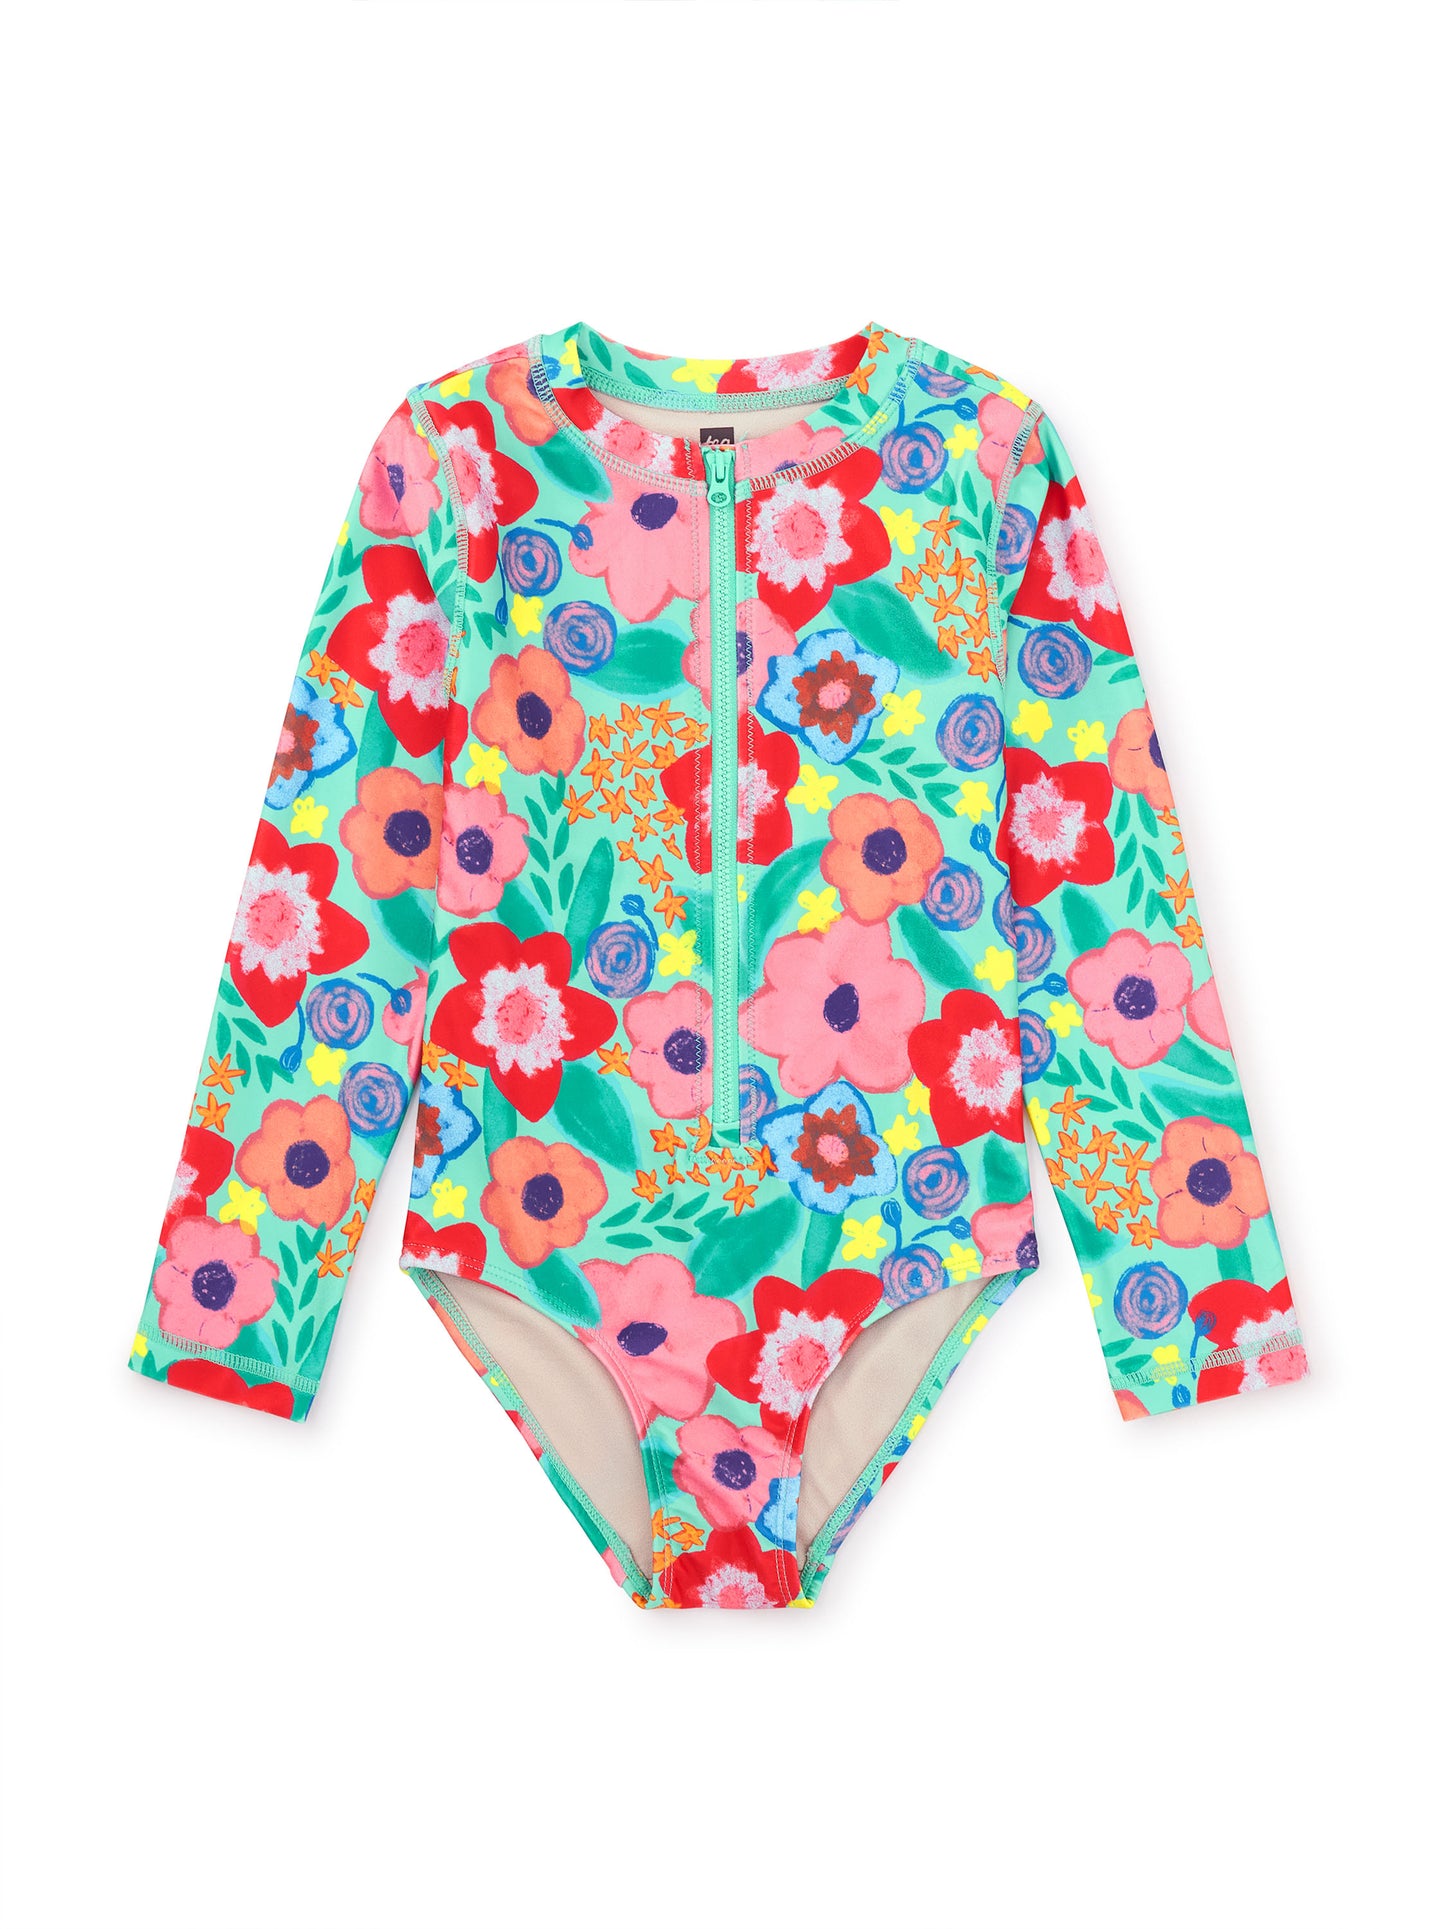 Tea Painterly Floral | Long Sleeve One Piece Swimsuit